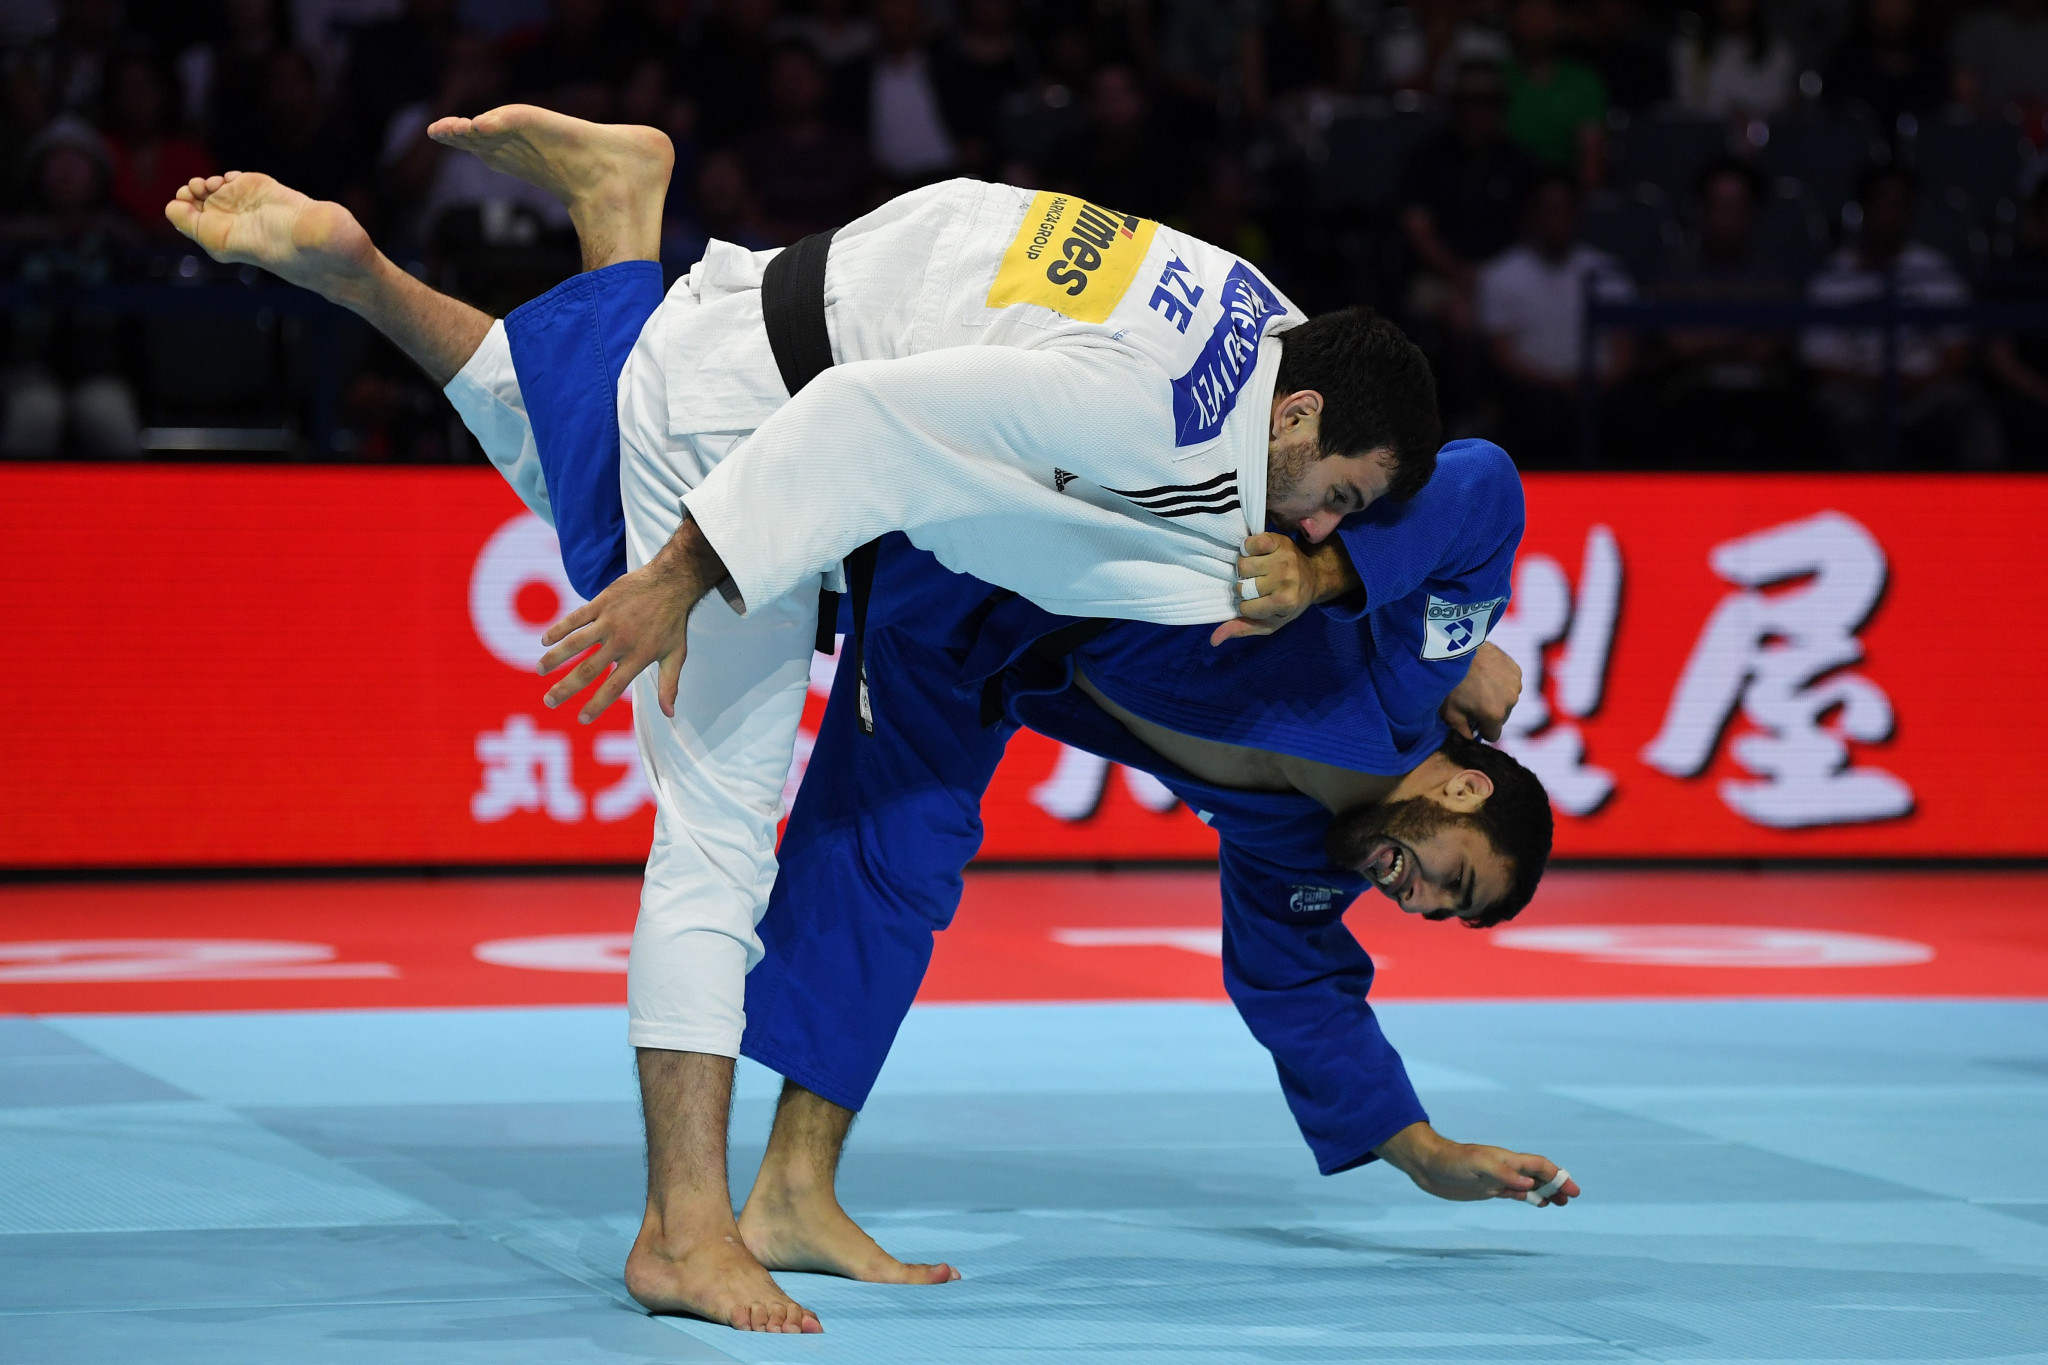 IJF suspend Throw to Tokyo competition following Olympic postponement